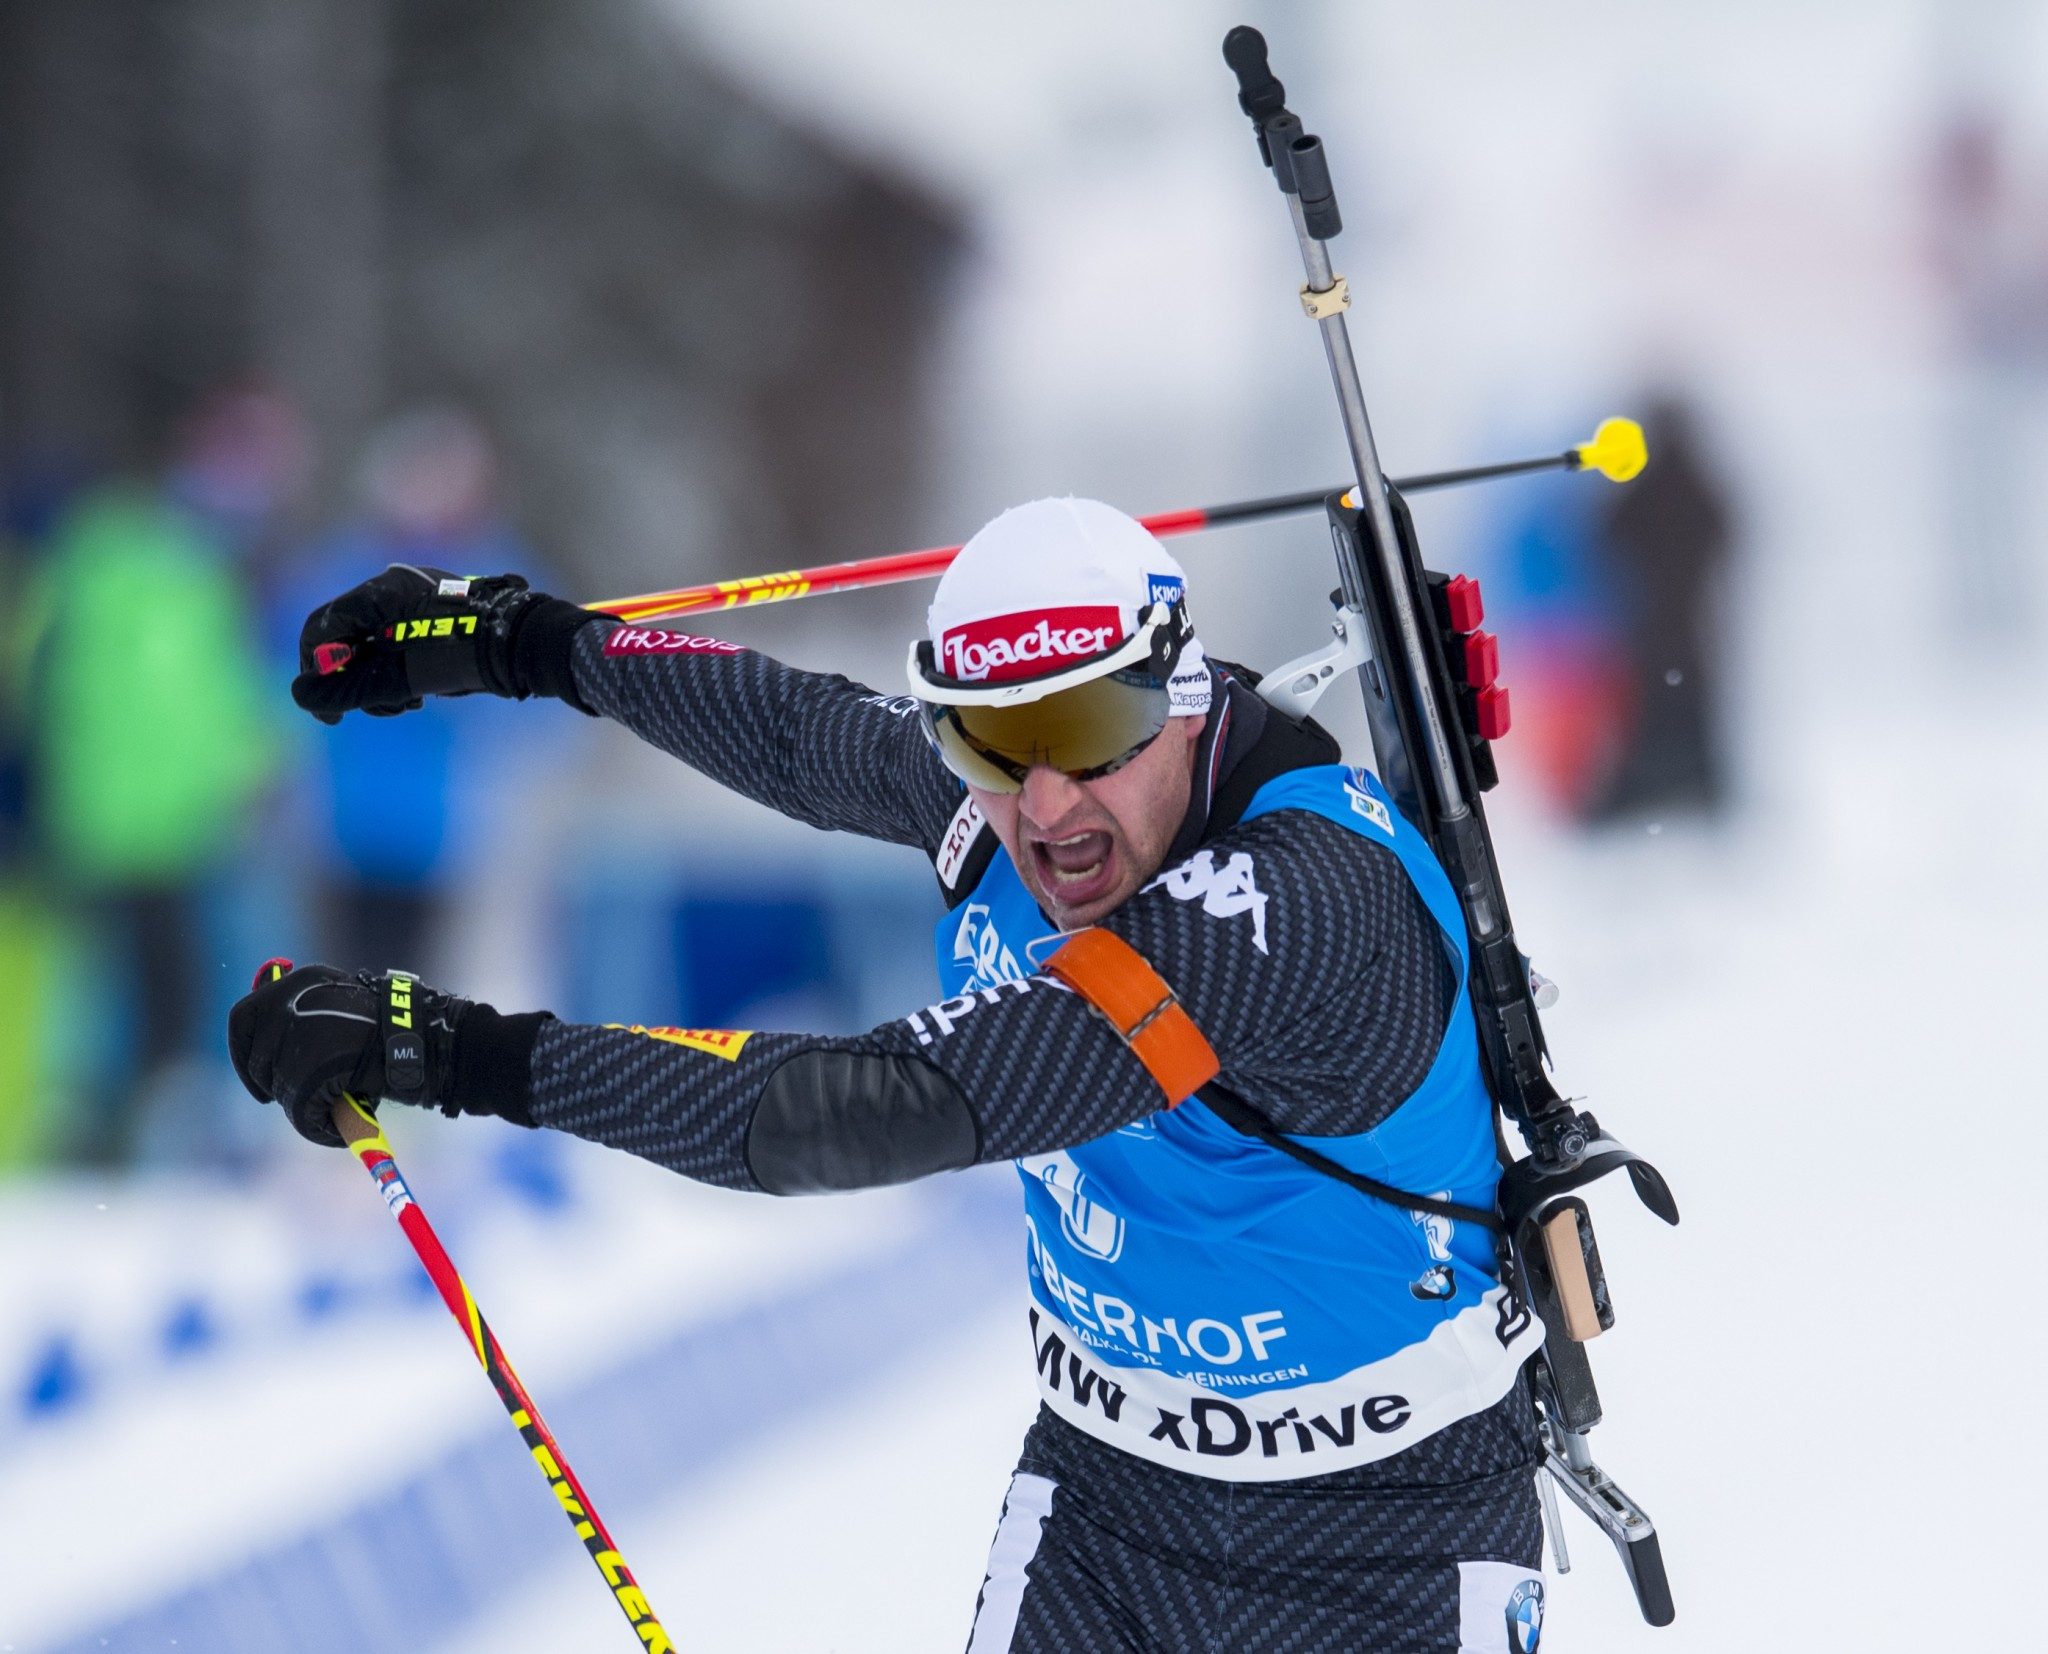 Italy's Windisch hoping for another Winter Olympic biathlon medal